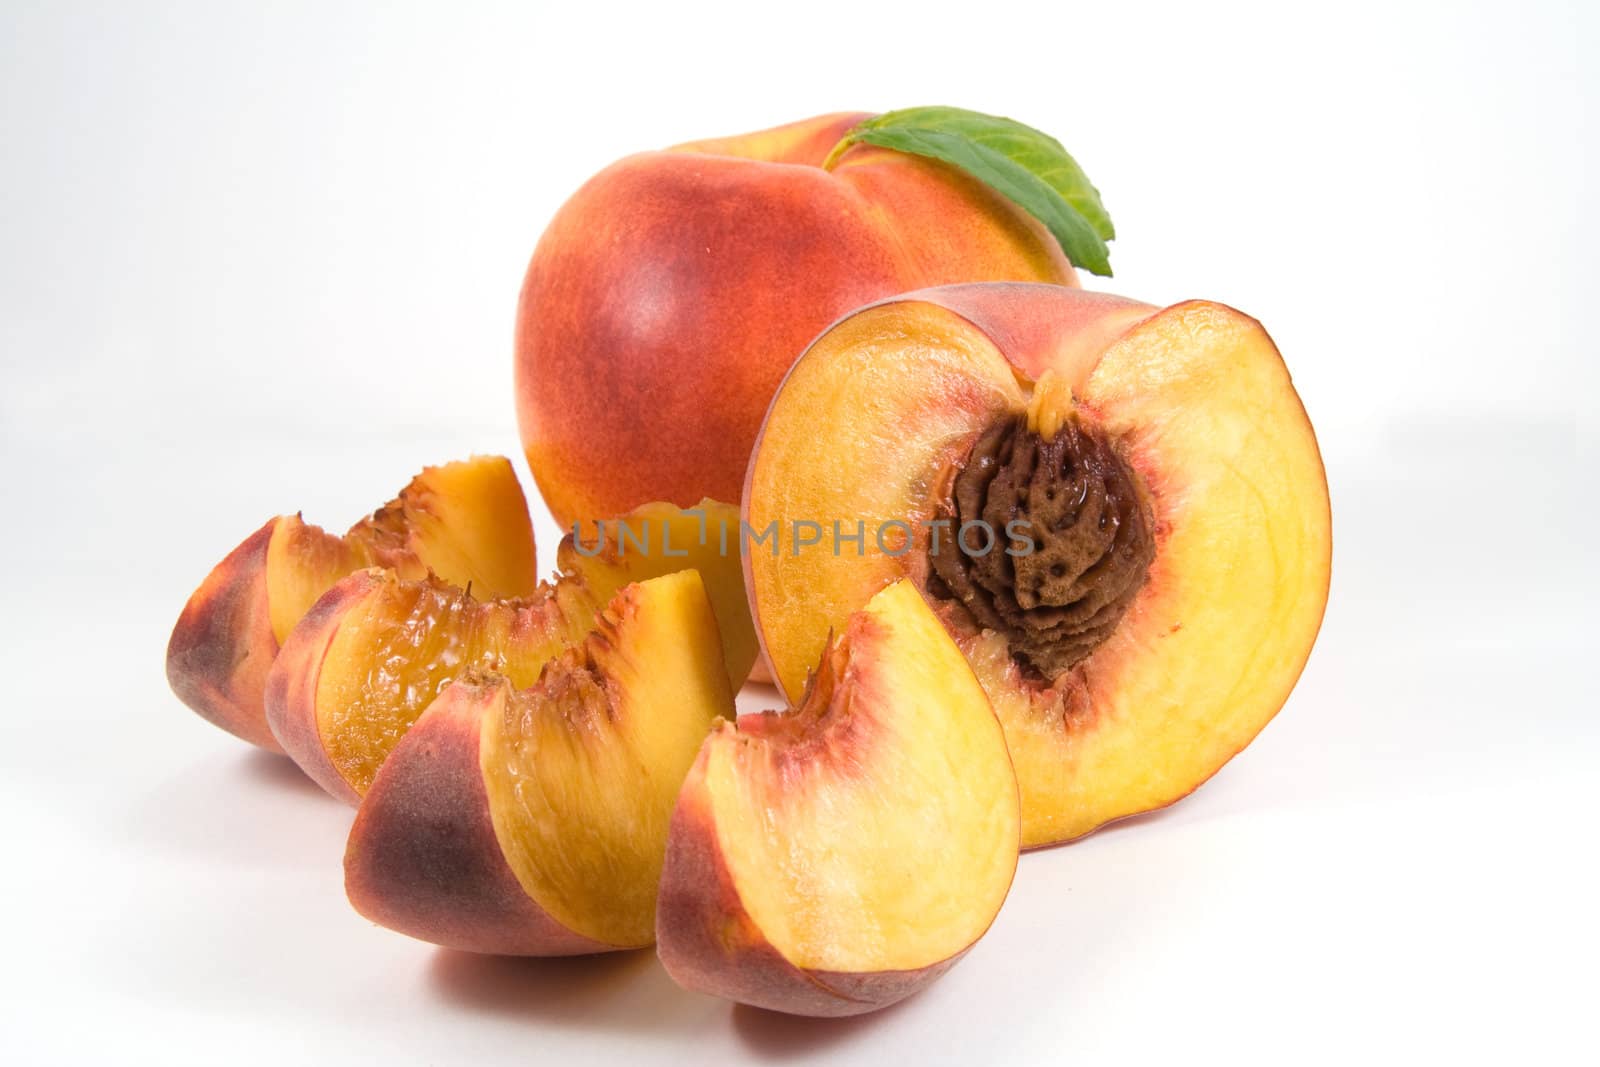 Nectarine, half of peach with pit and pieces by serpl